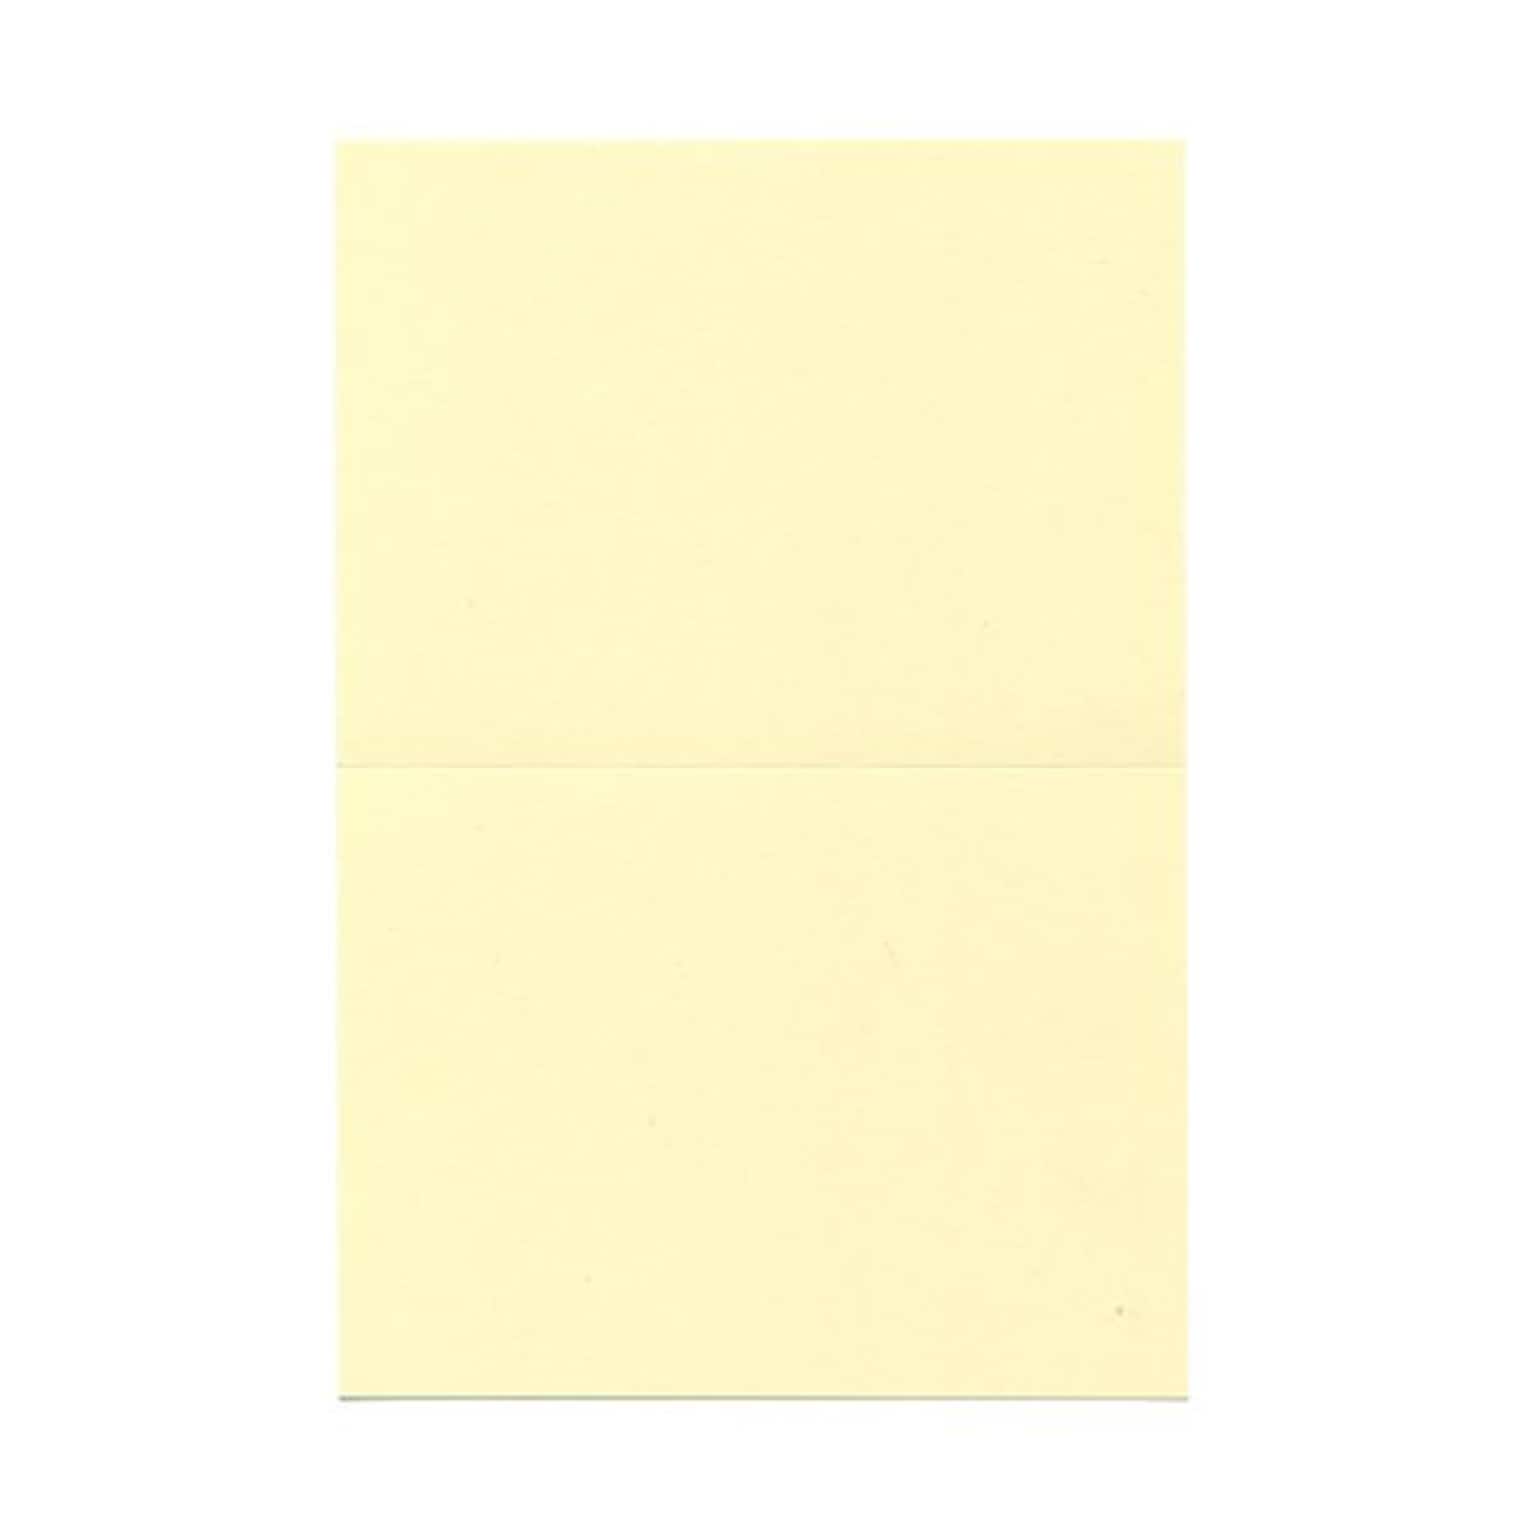 JAM Paper® Blank Foldover Cards, A6 size, 4 5/8 x 6 1/4, Ivory, 25/pack (309920C)